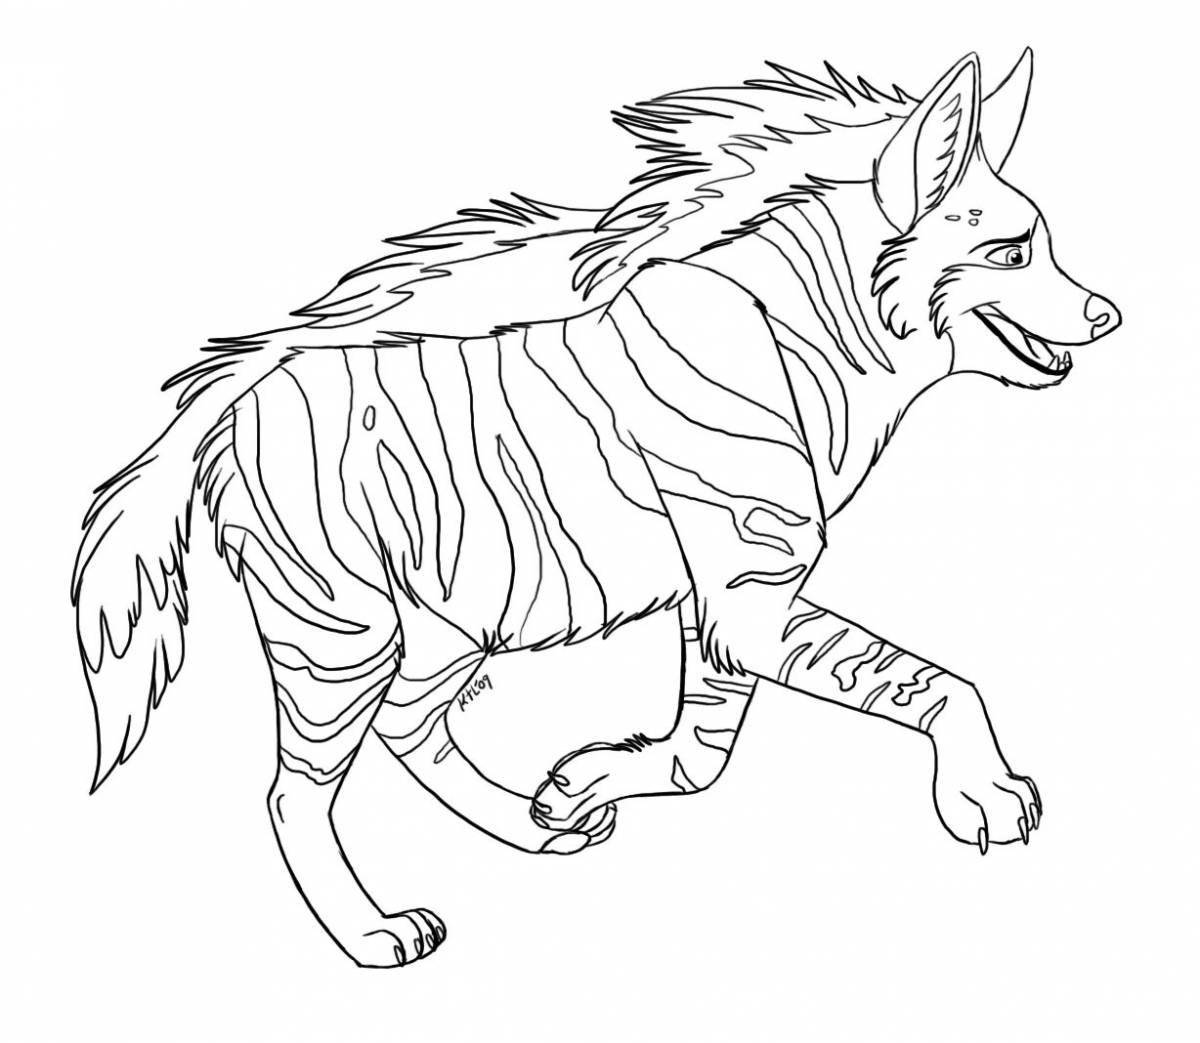 Adorable striped hyena coloring page